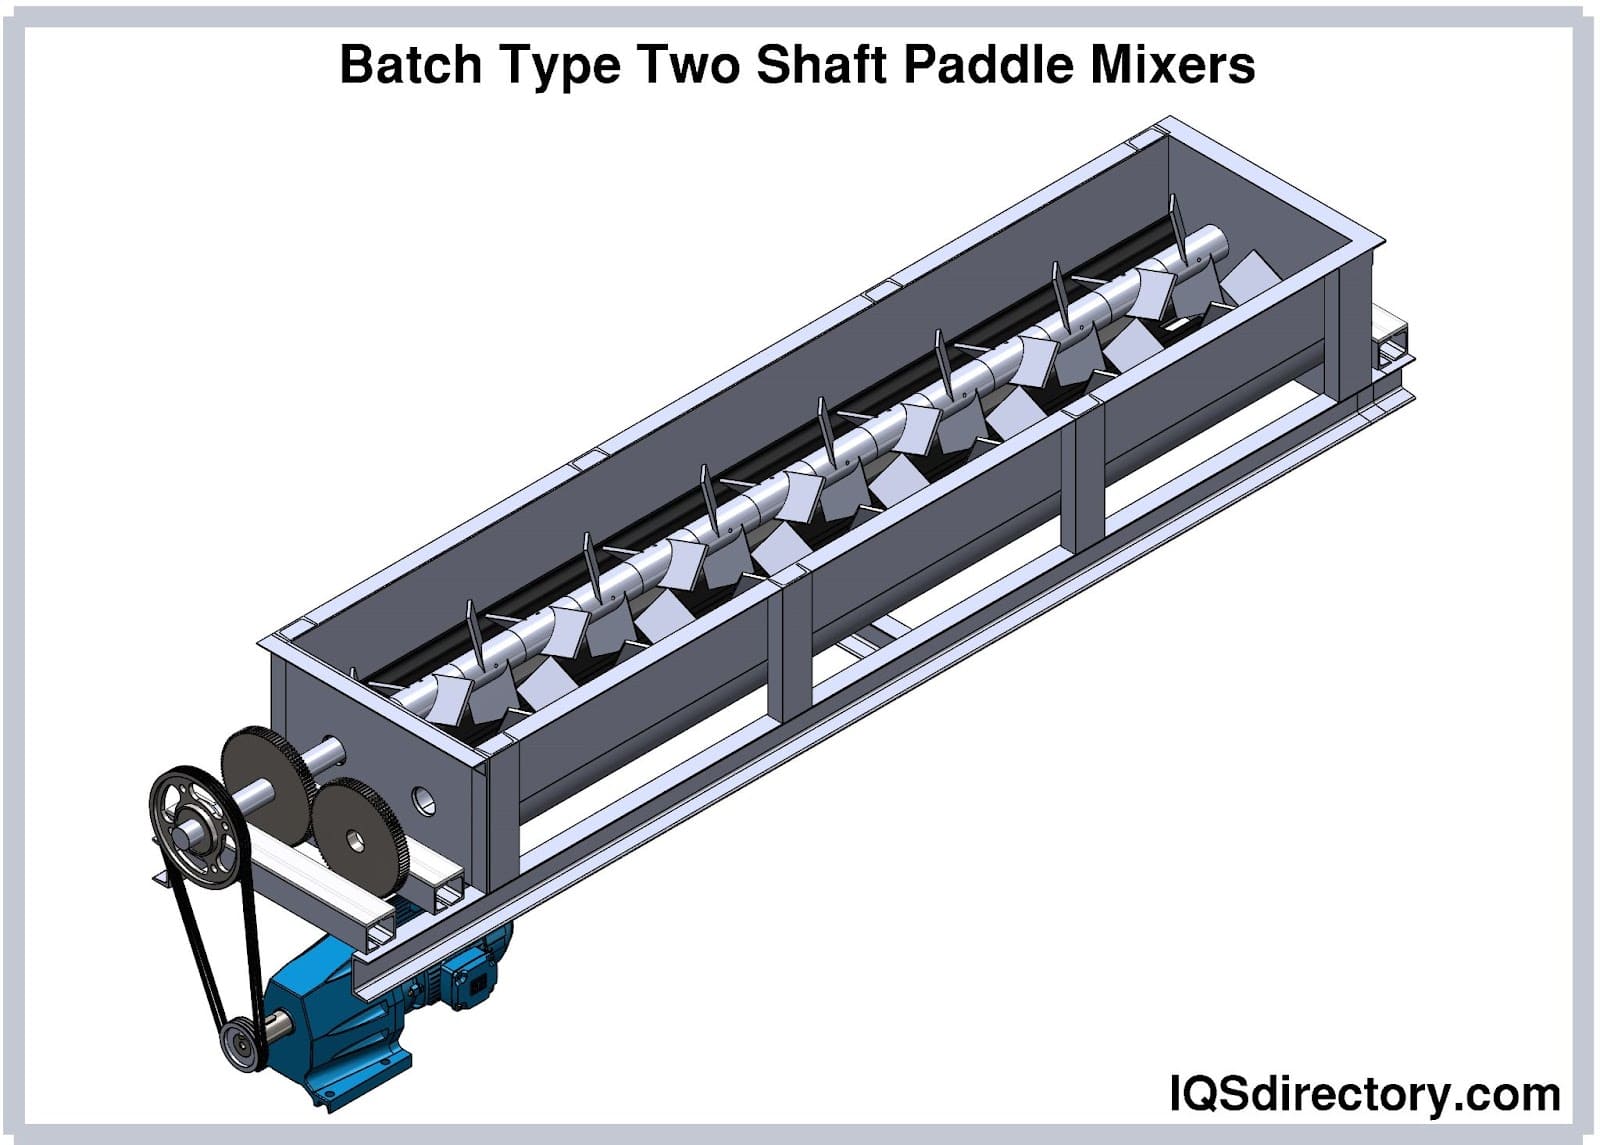 Batch Type Two Shaft Paddle Mixers